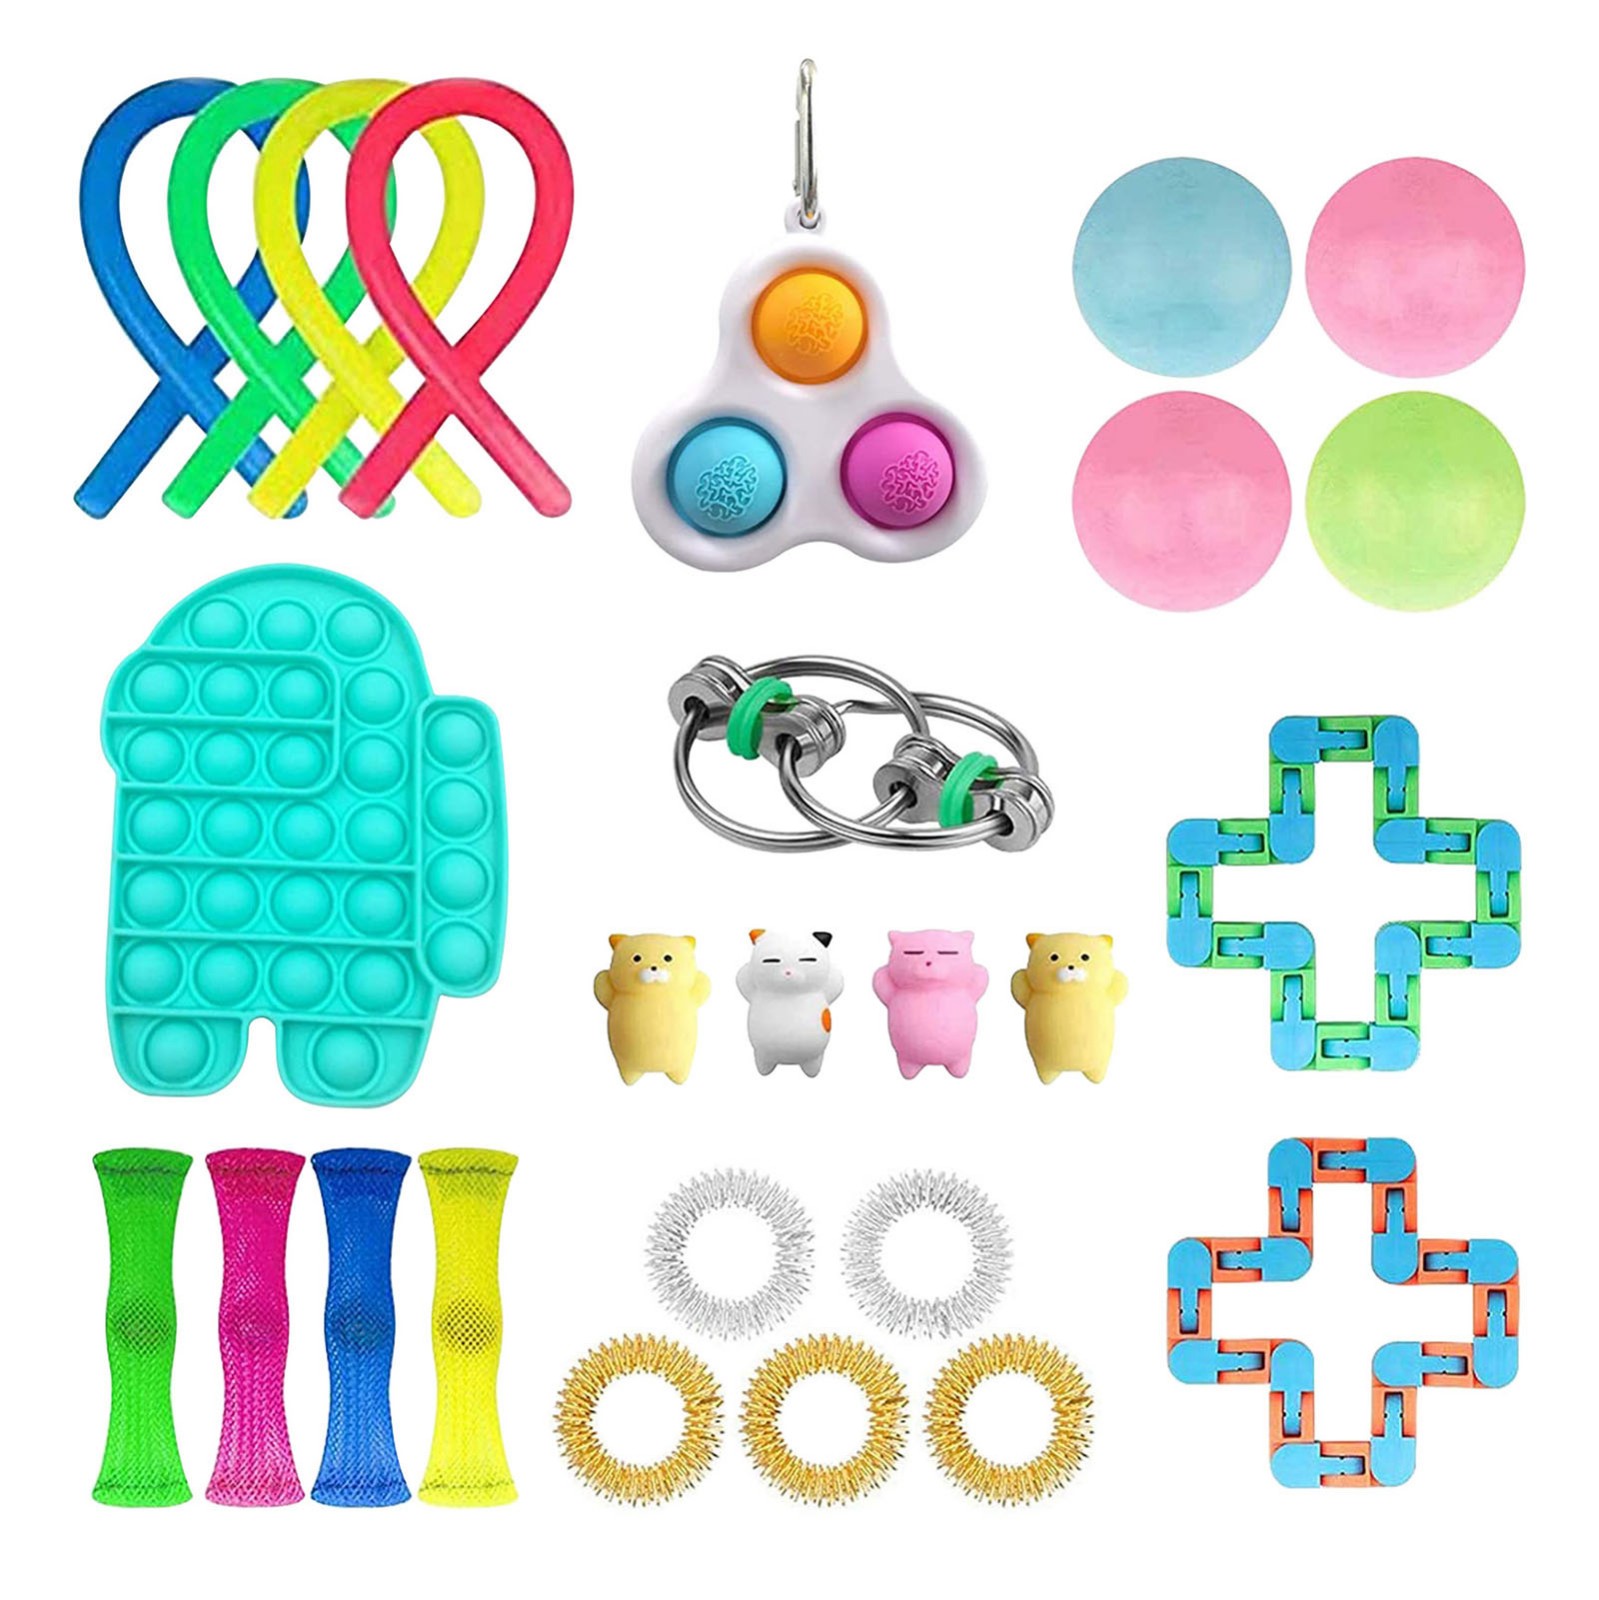 Pop-it Dimple Figet Toys for Kids and Adults with Colorful Pineapple Push Bubble 22Pcs Fidget Toys Set 34 Pack Fidget Toys Set Sensory Fidget Toys Pack Stress Relief and Anti-anxiety Tools 